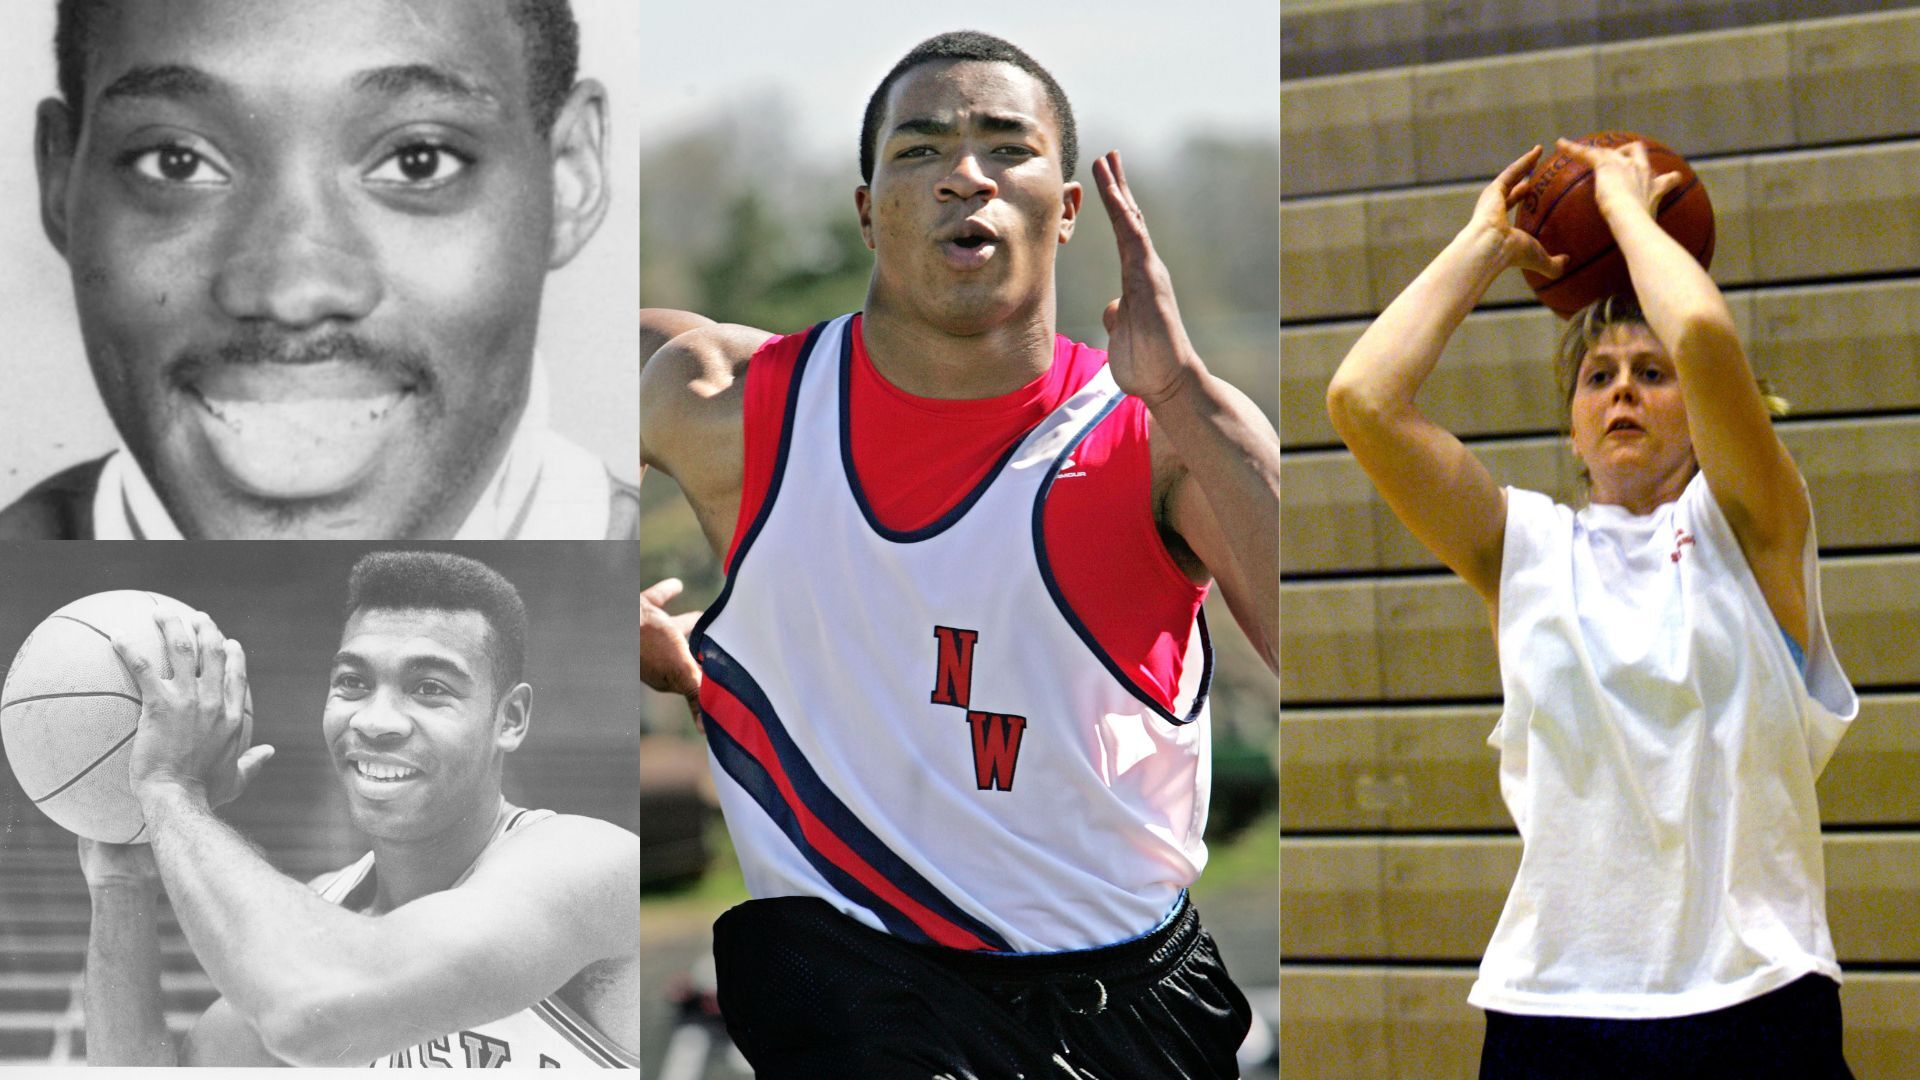 Stephanie Jones, BJ Lawrence, and Cedric Hunter Inducted into OPS Athletics Hall of Fame